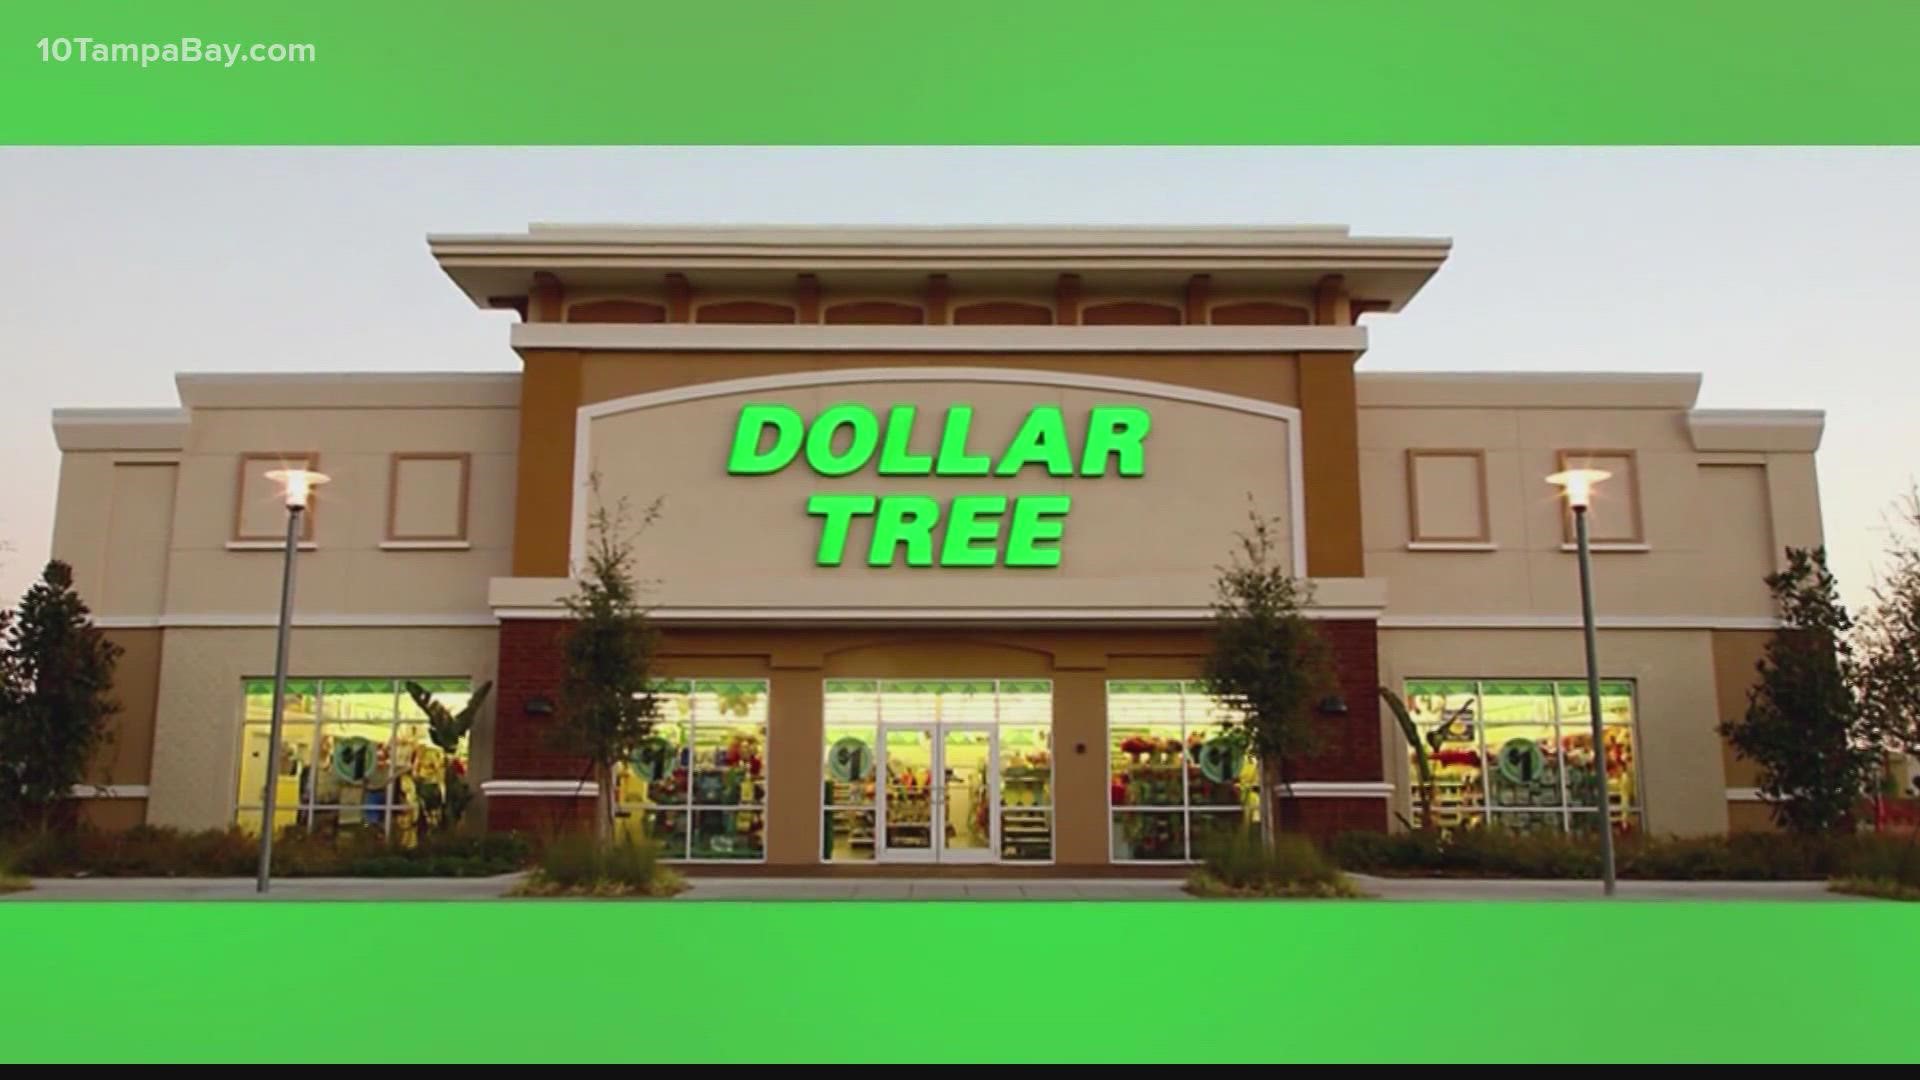 Dollar Tree said the decision to raise its prices from $1 to $1.25 is 'permanent' and 'not a reaction to short-term or transitory market conditions.'